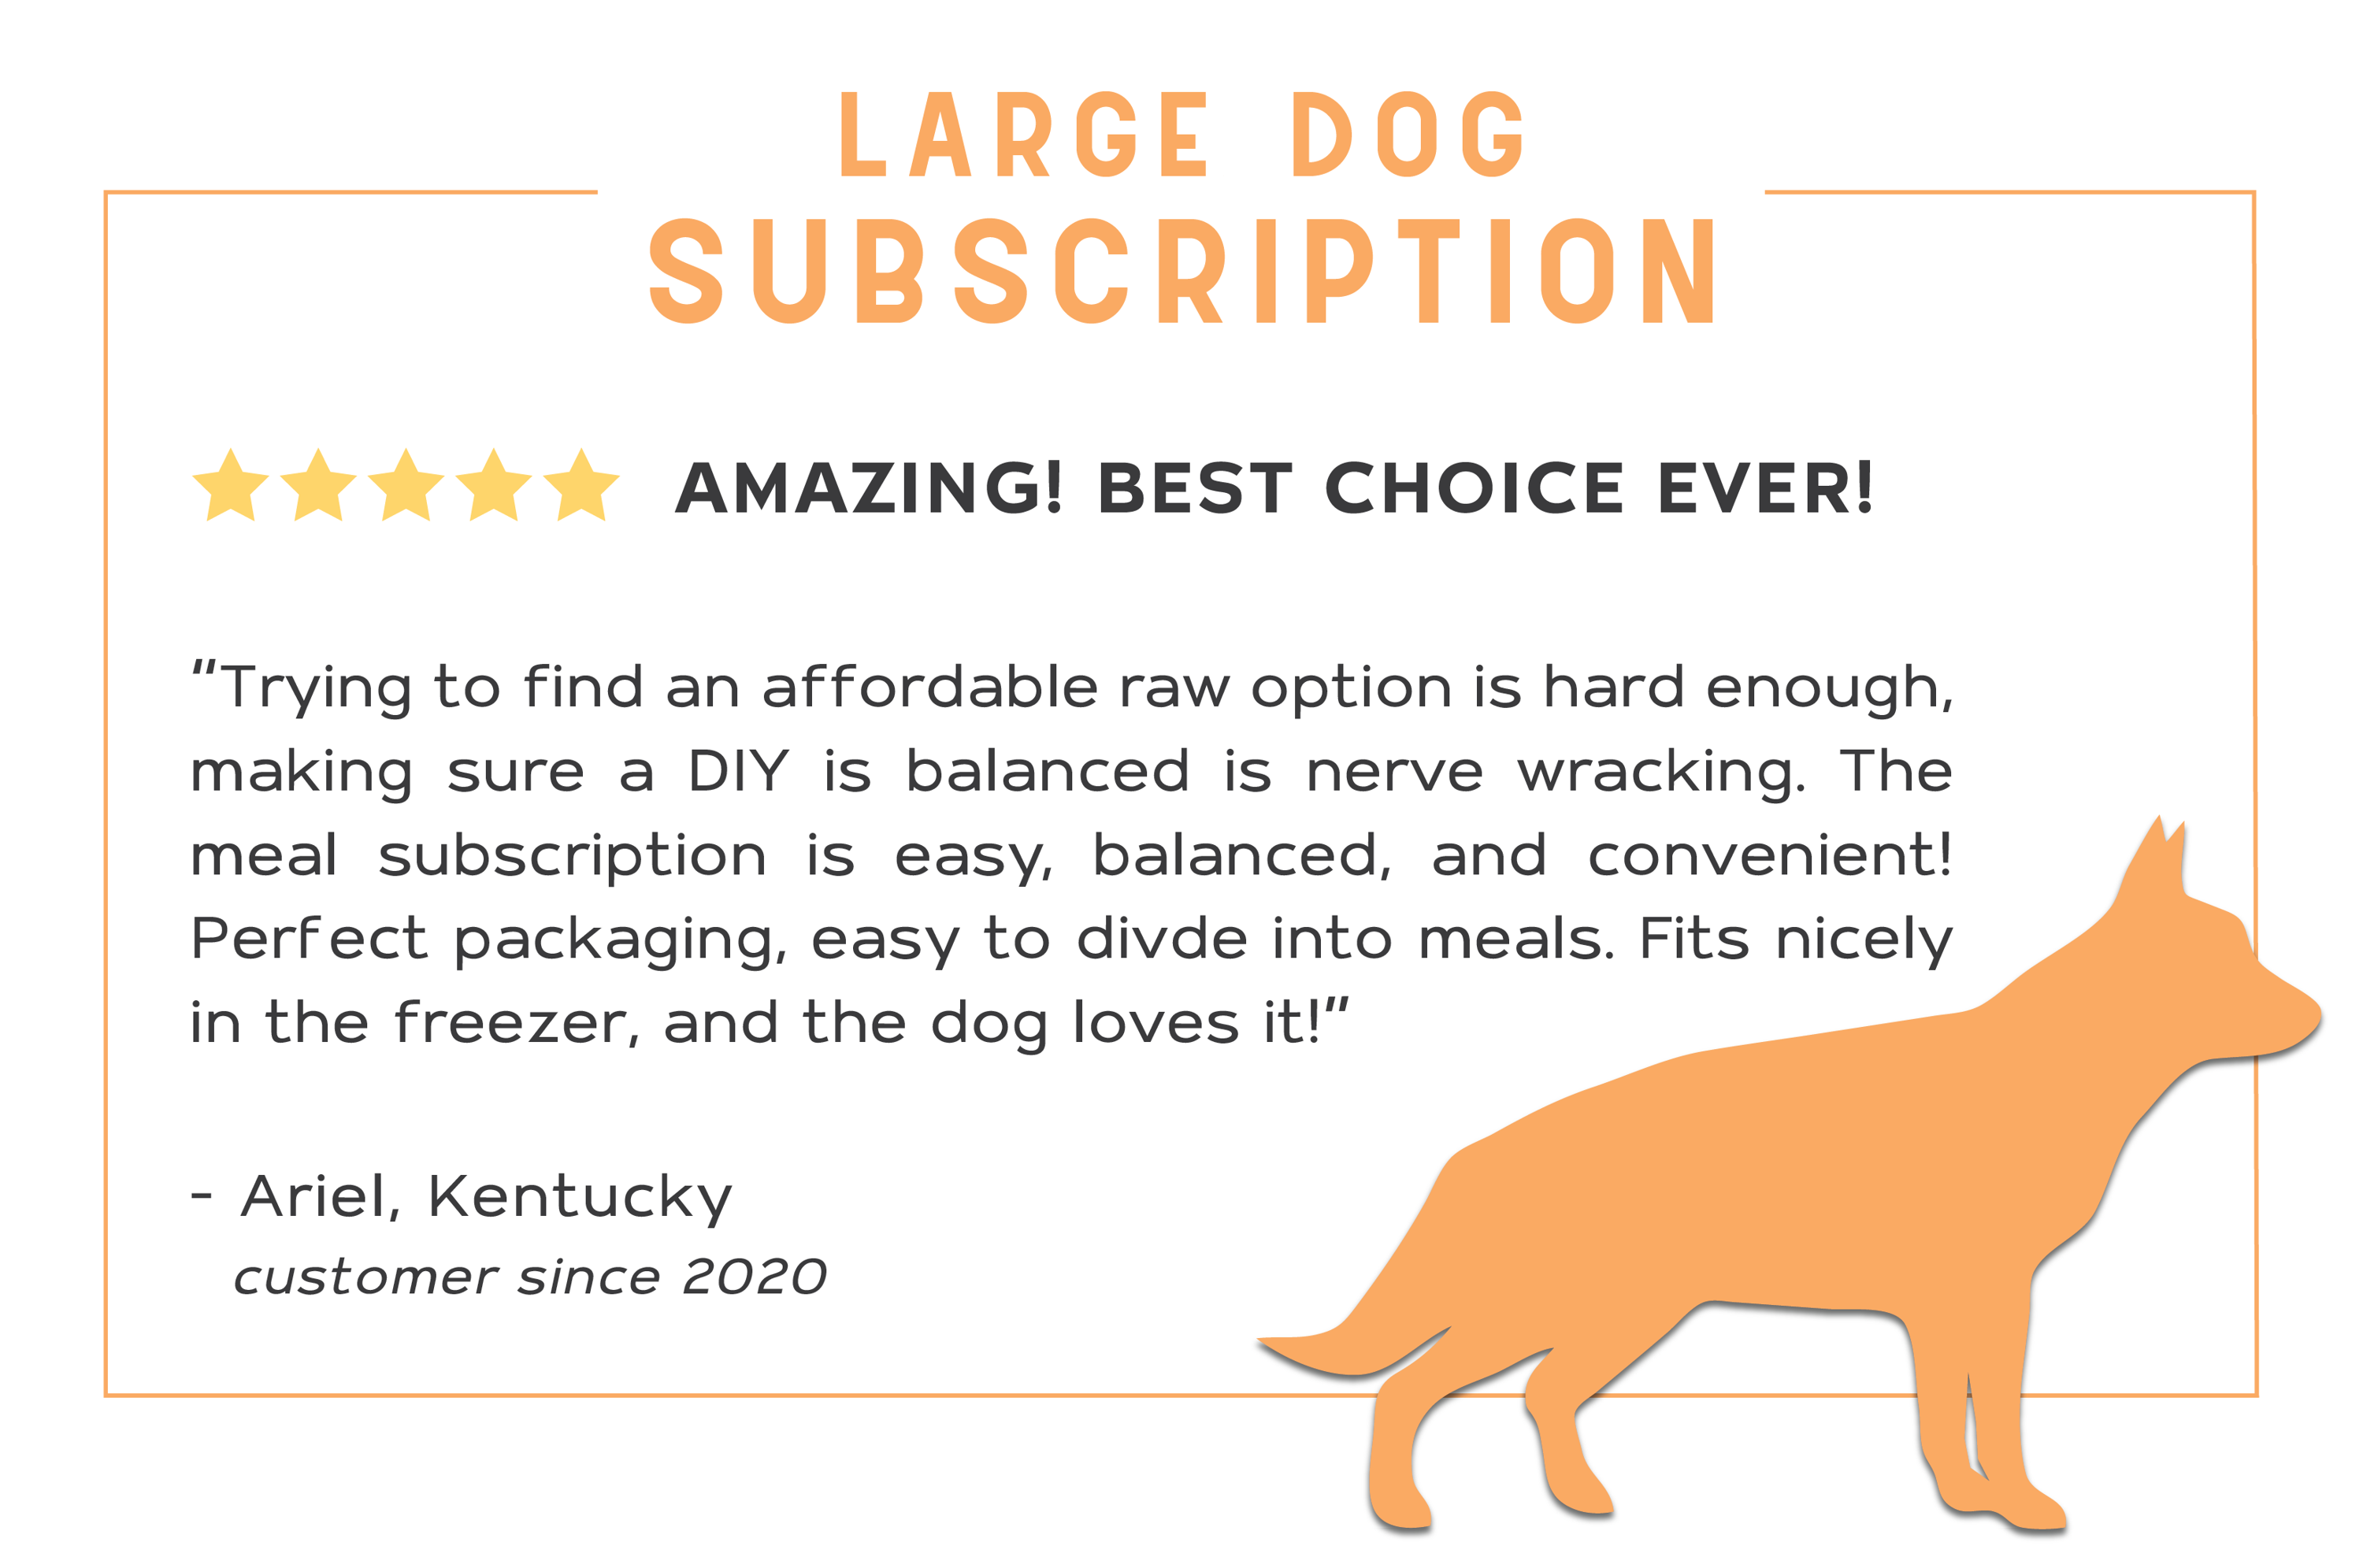 Customer review explaining why they love the large dog subscription.